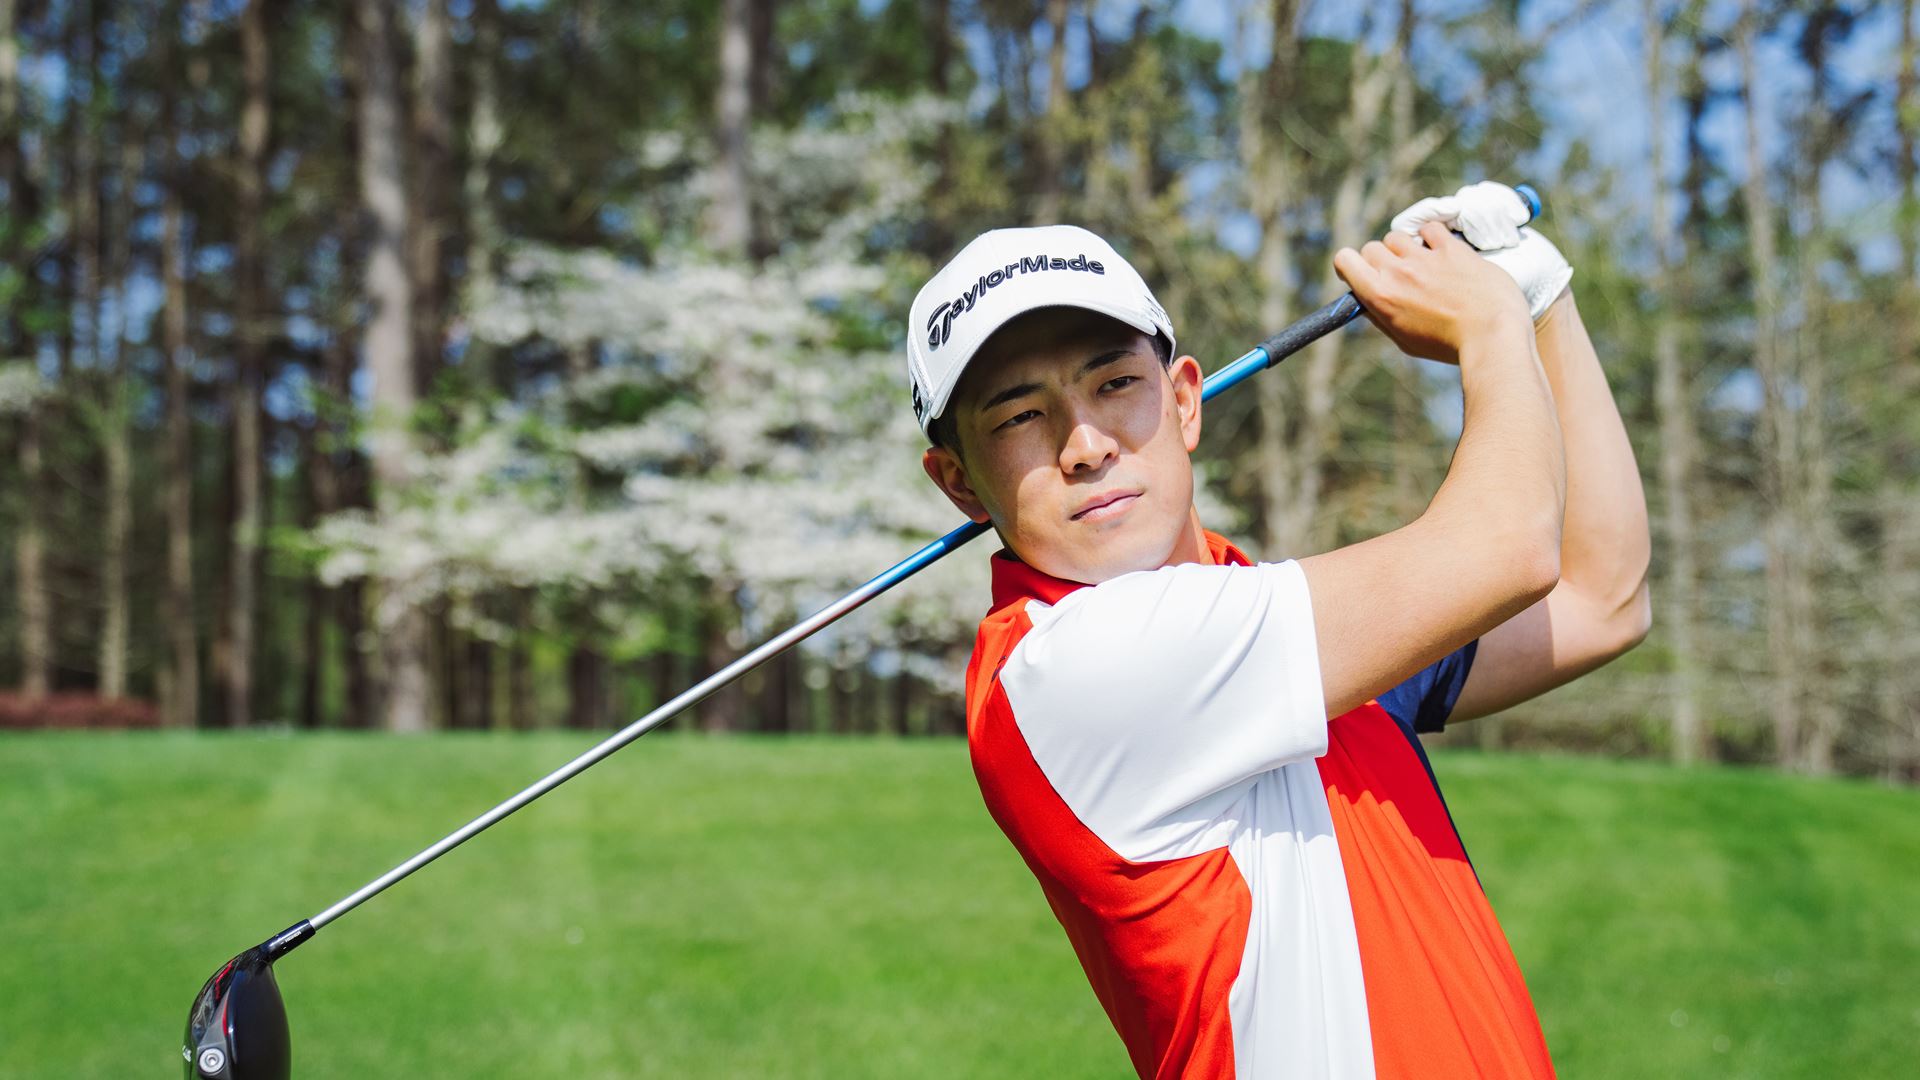 No. 1 Ranked Men’s Amateur In The World Keita Nakajima Signs Multi-Year Agreement with TaylorMade Golf Company; Set to Play Full Bag of TaylorMade Equipment and Wear TaylorMade Apparel